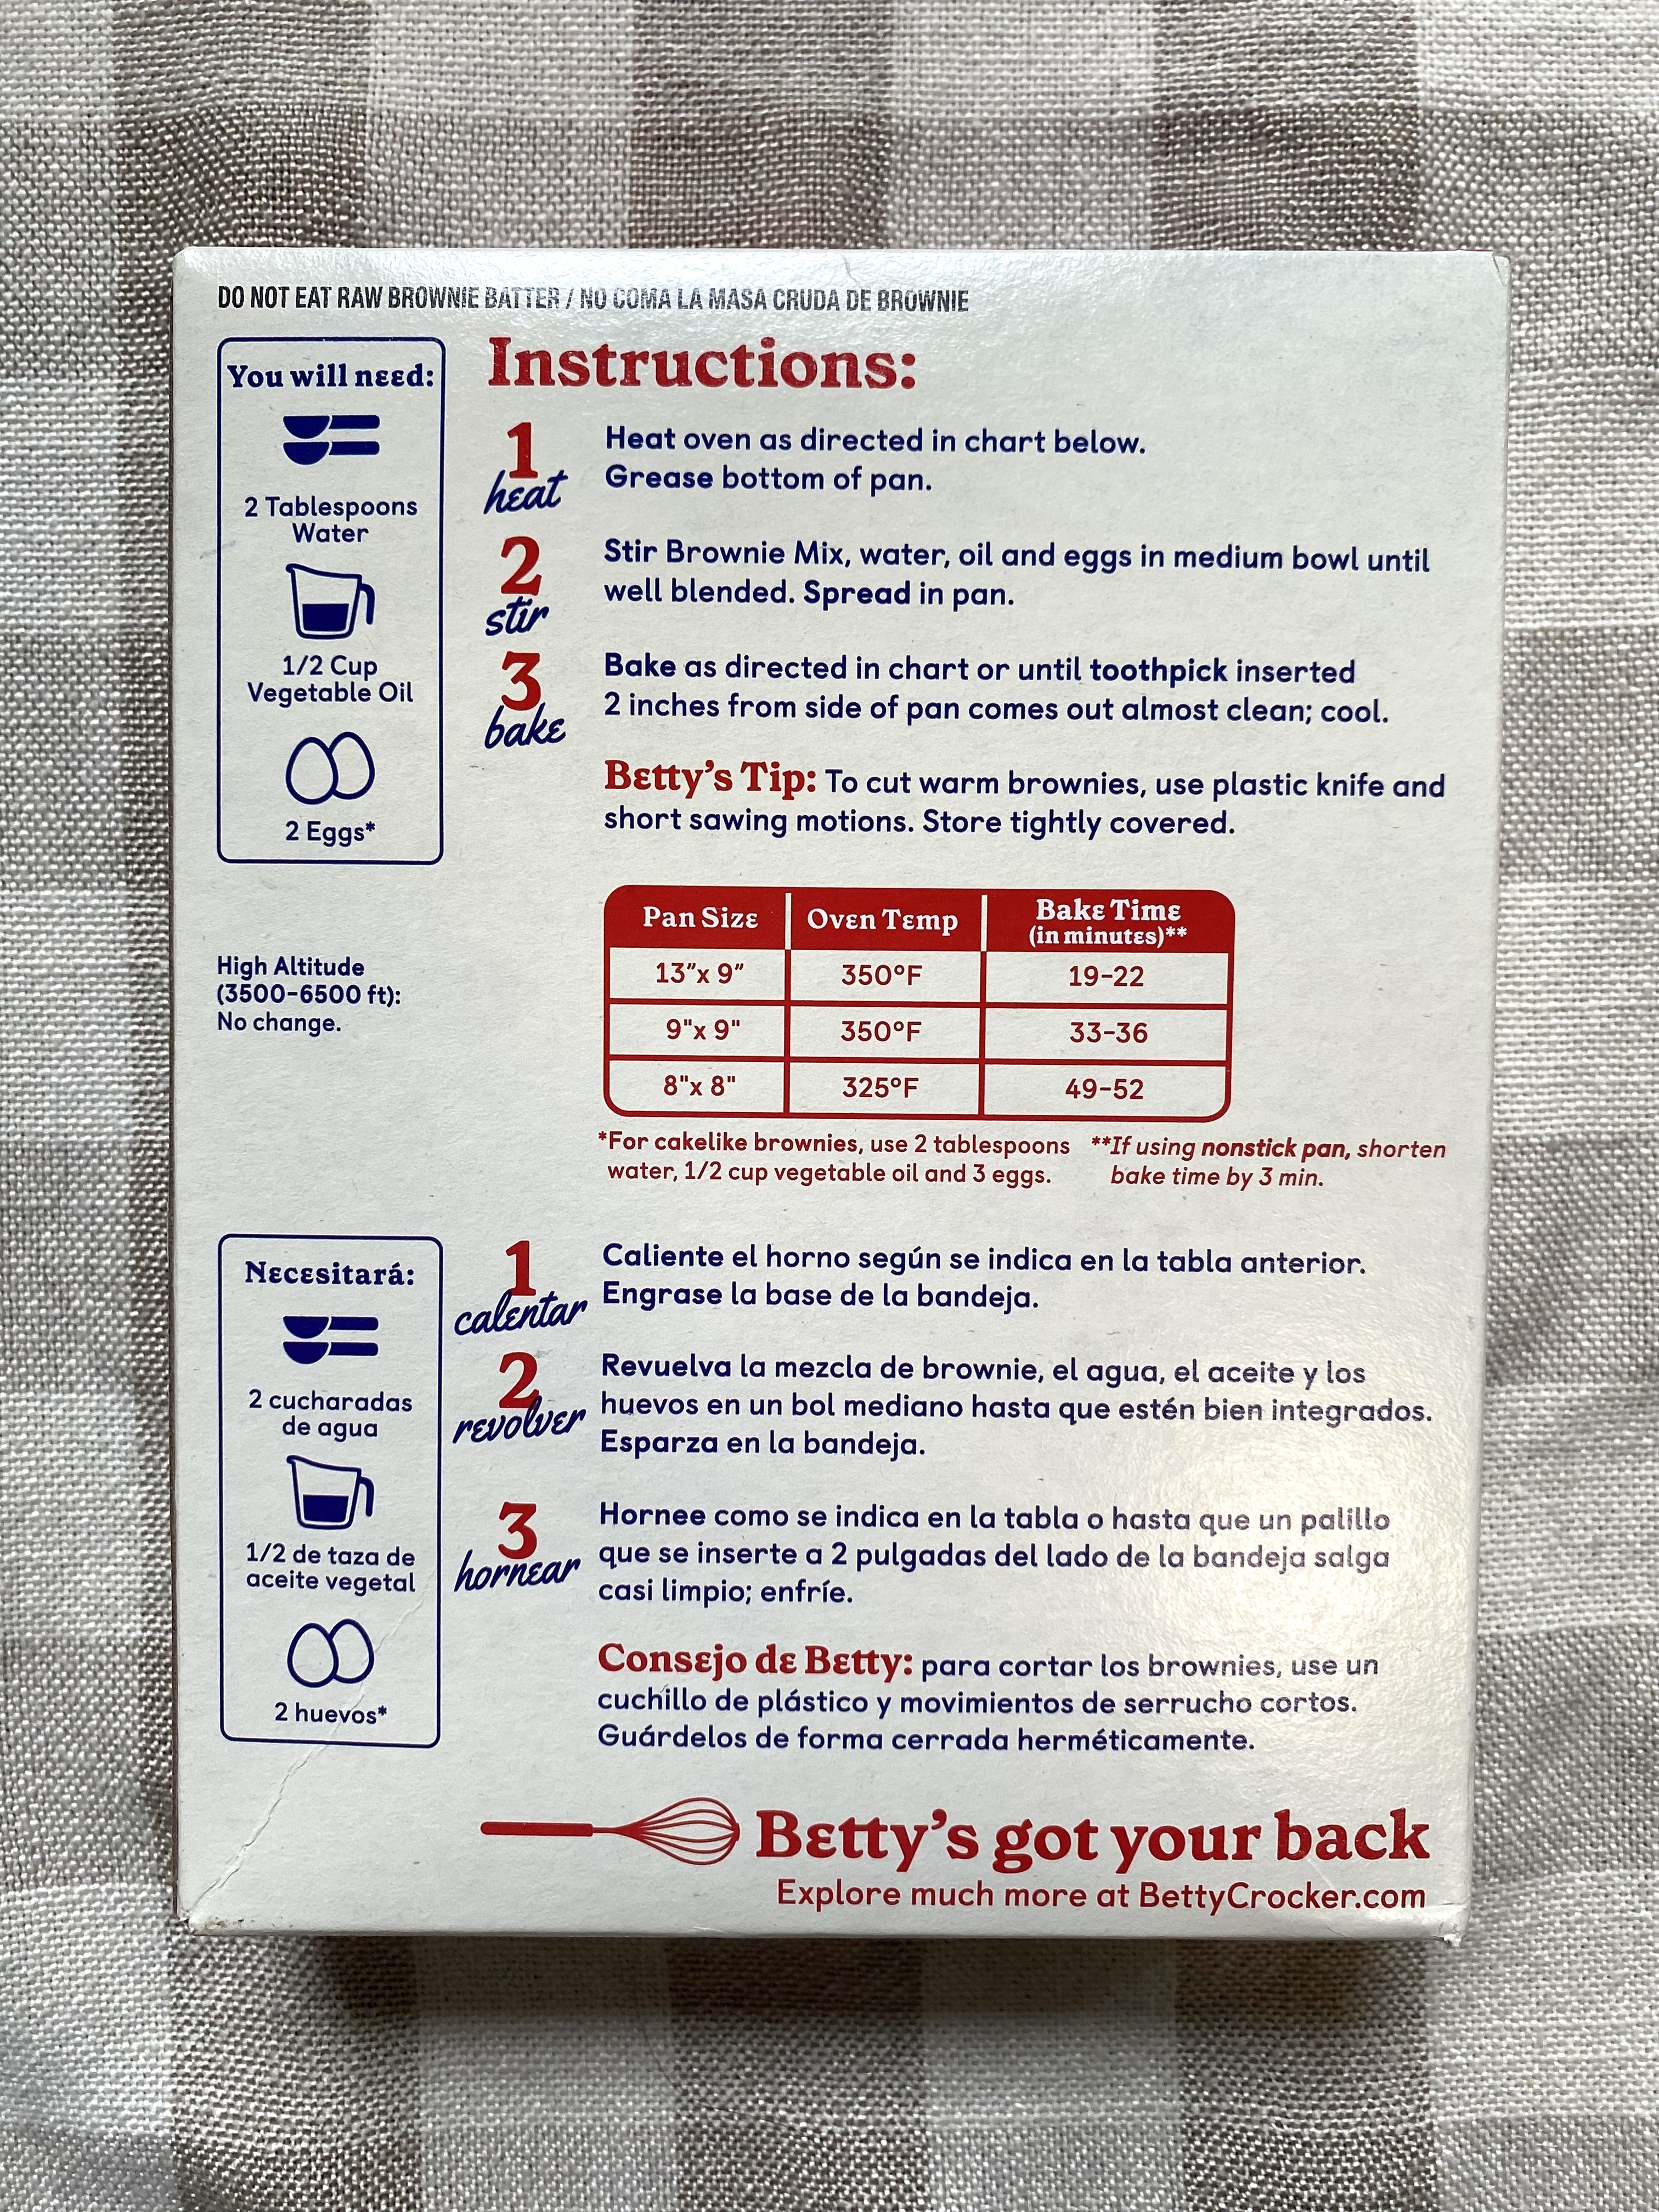 Recipe on a Betty Crocker brownie mix box with instructions and ingredients listed in English and Spanish